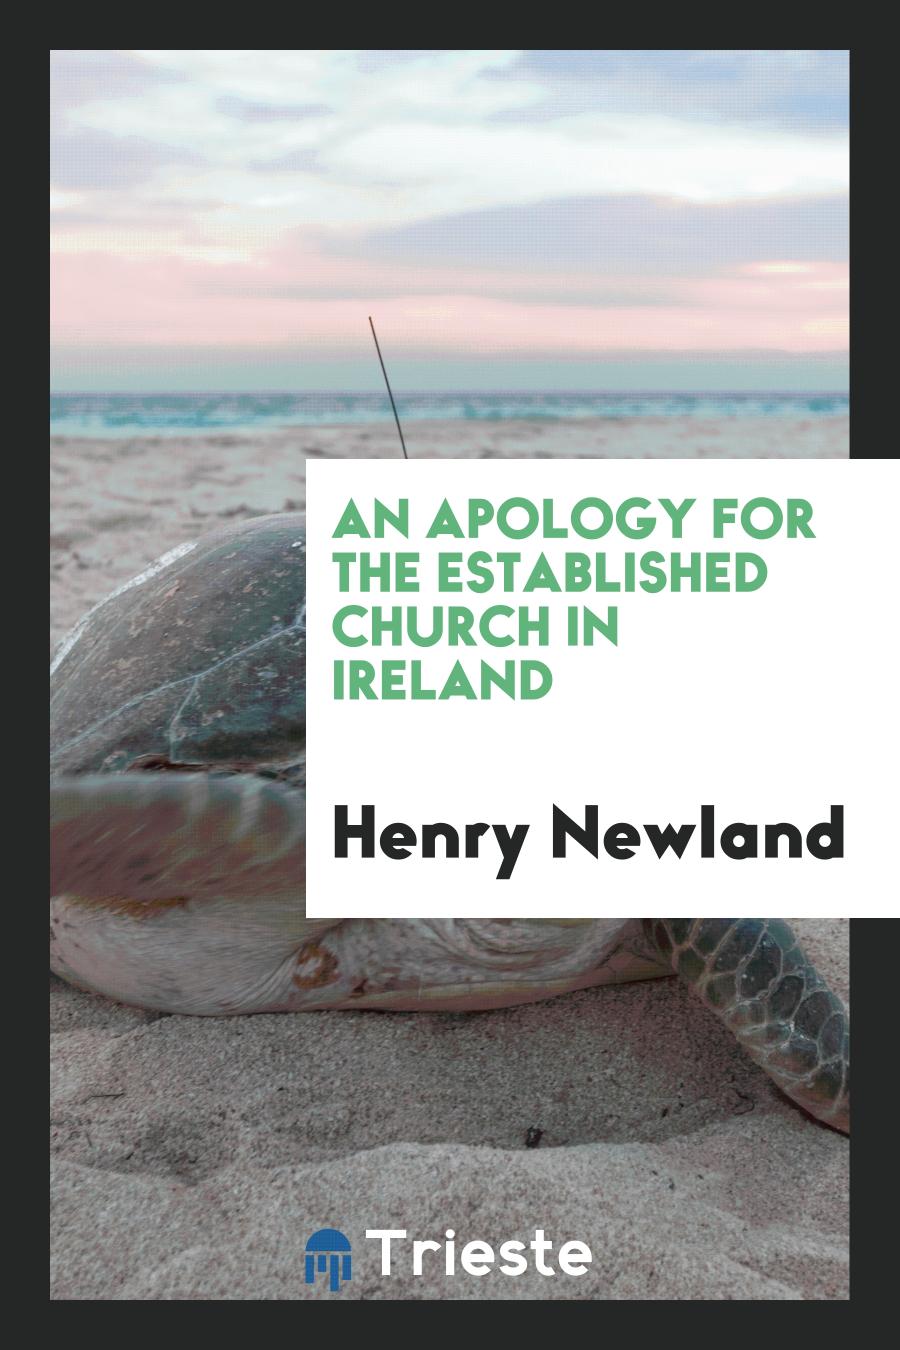 An Apology for the Established Church in Ireland